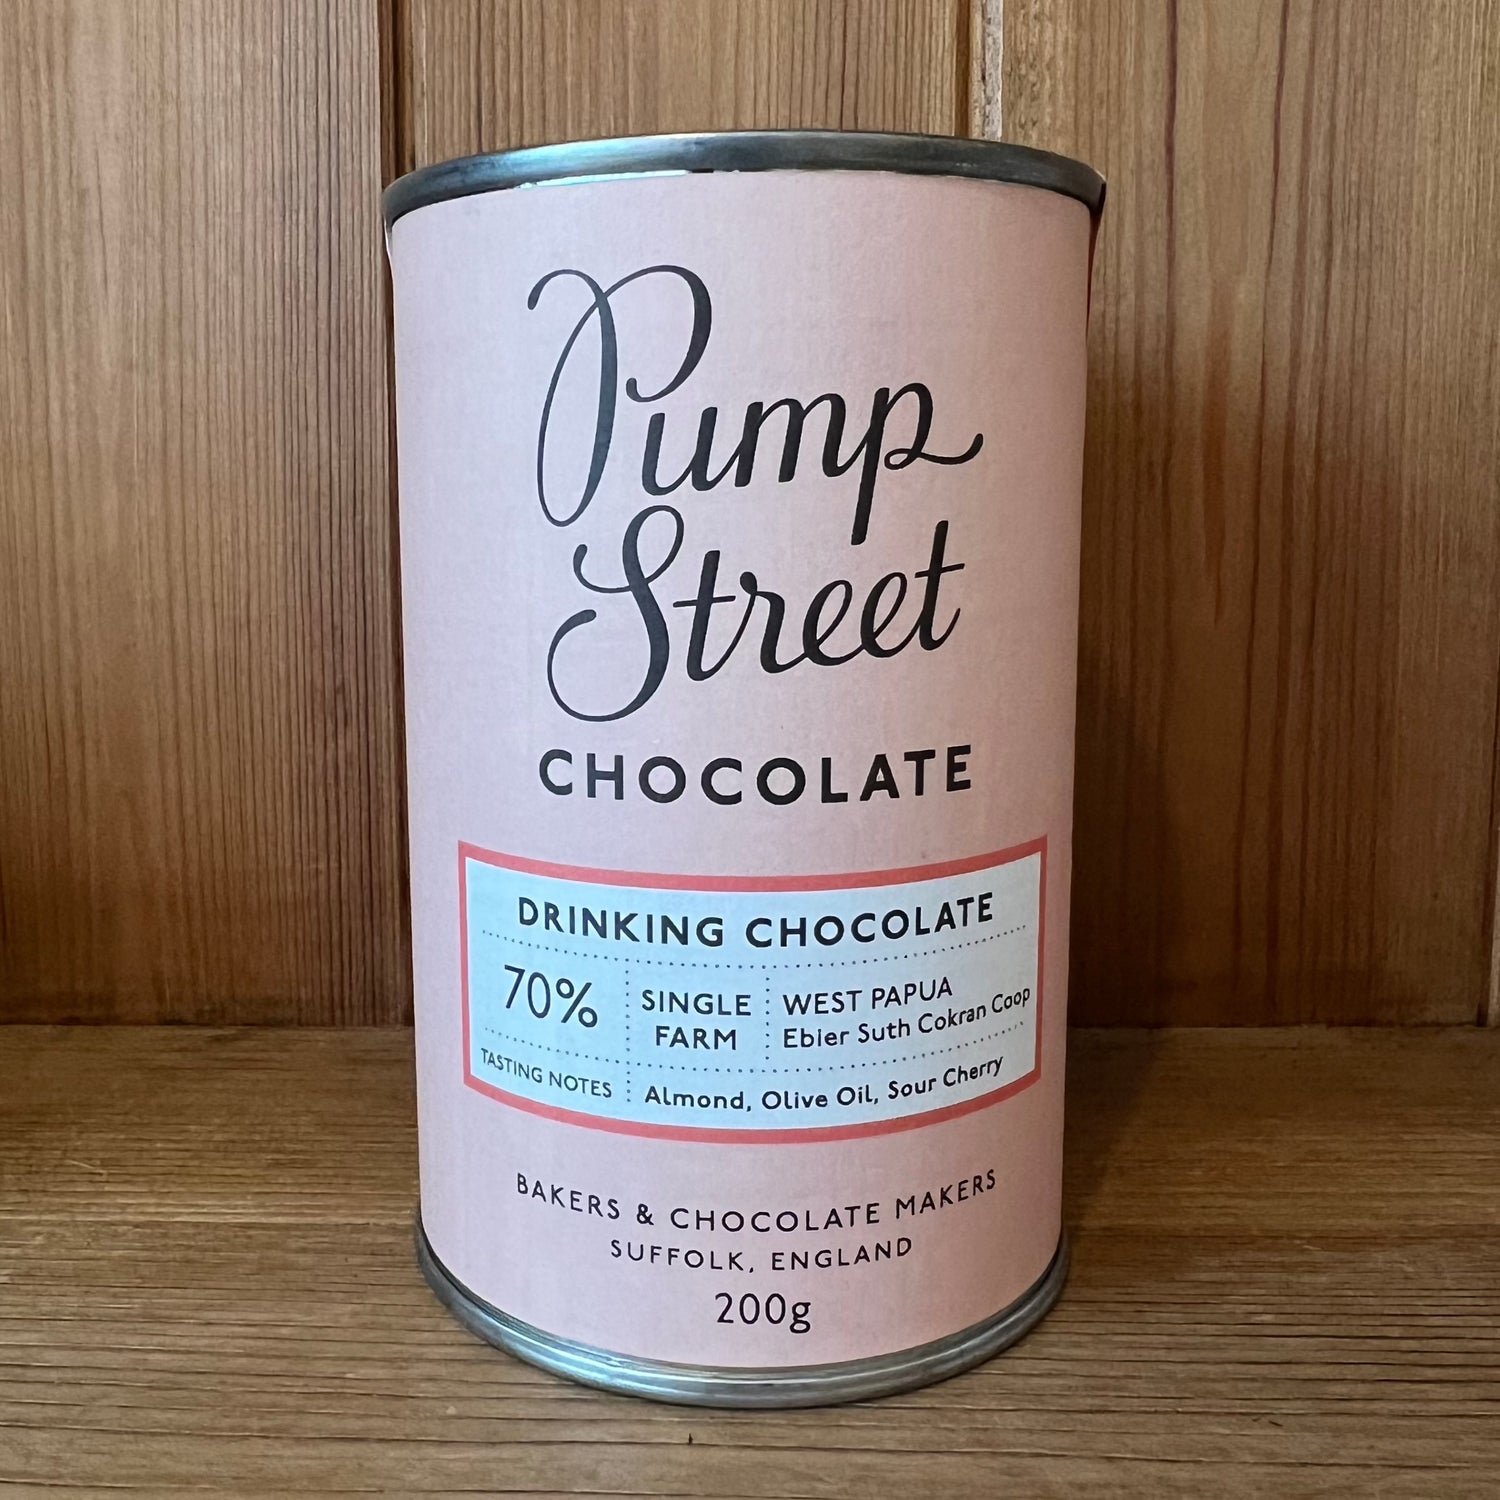 Drinking Chocolate - West Papua 70% By Pump Street Chocolate